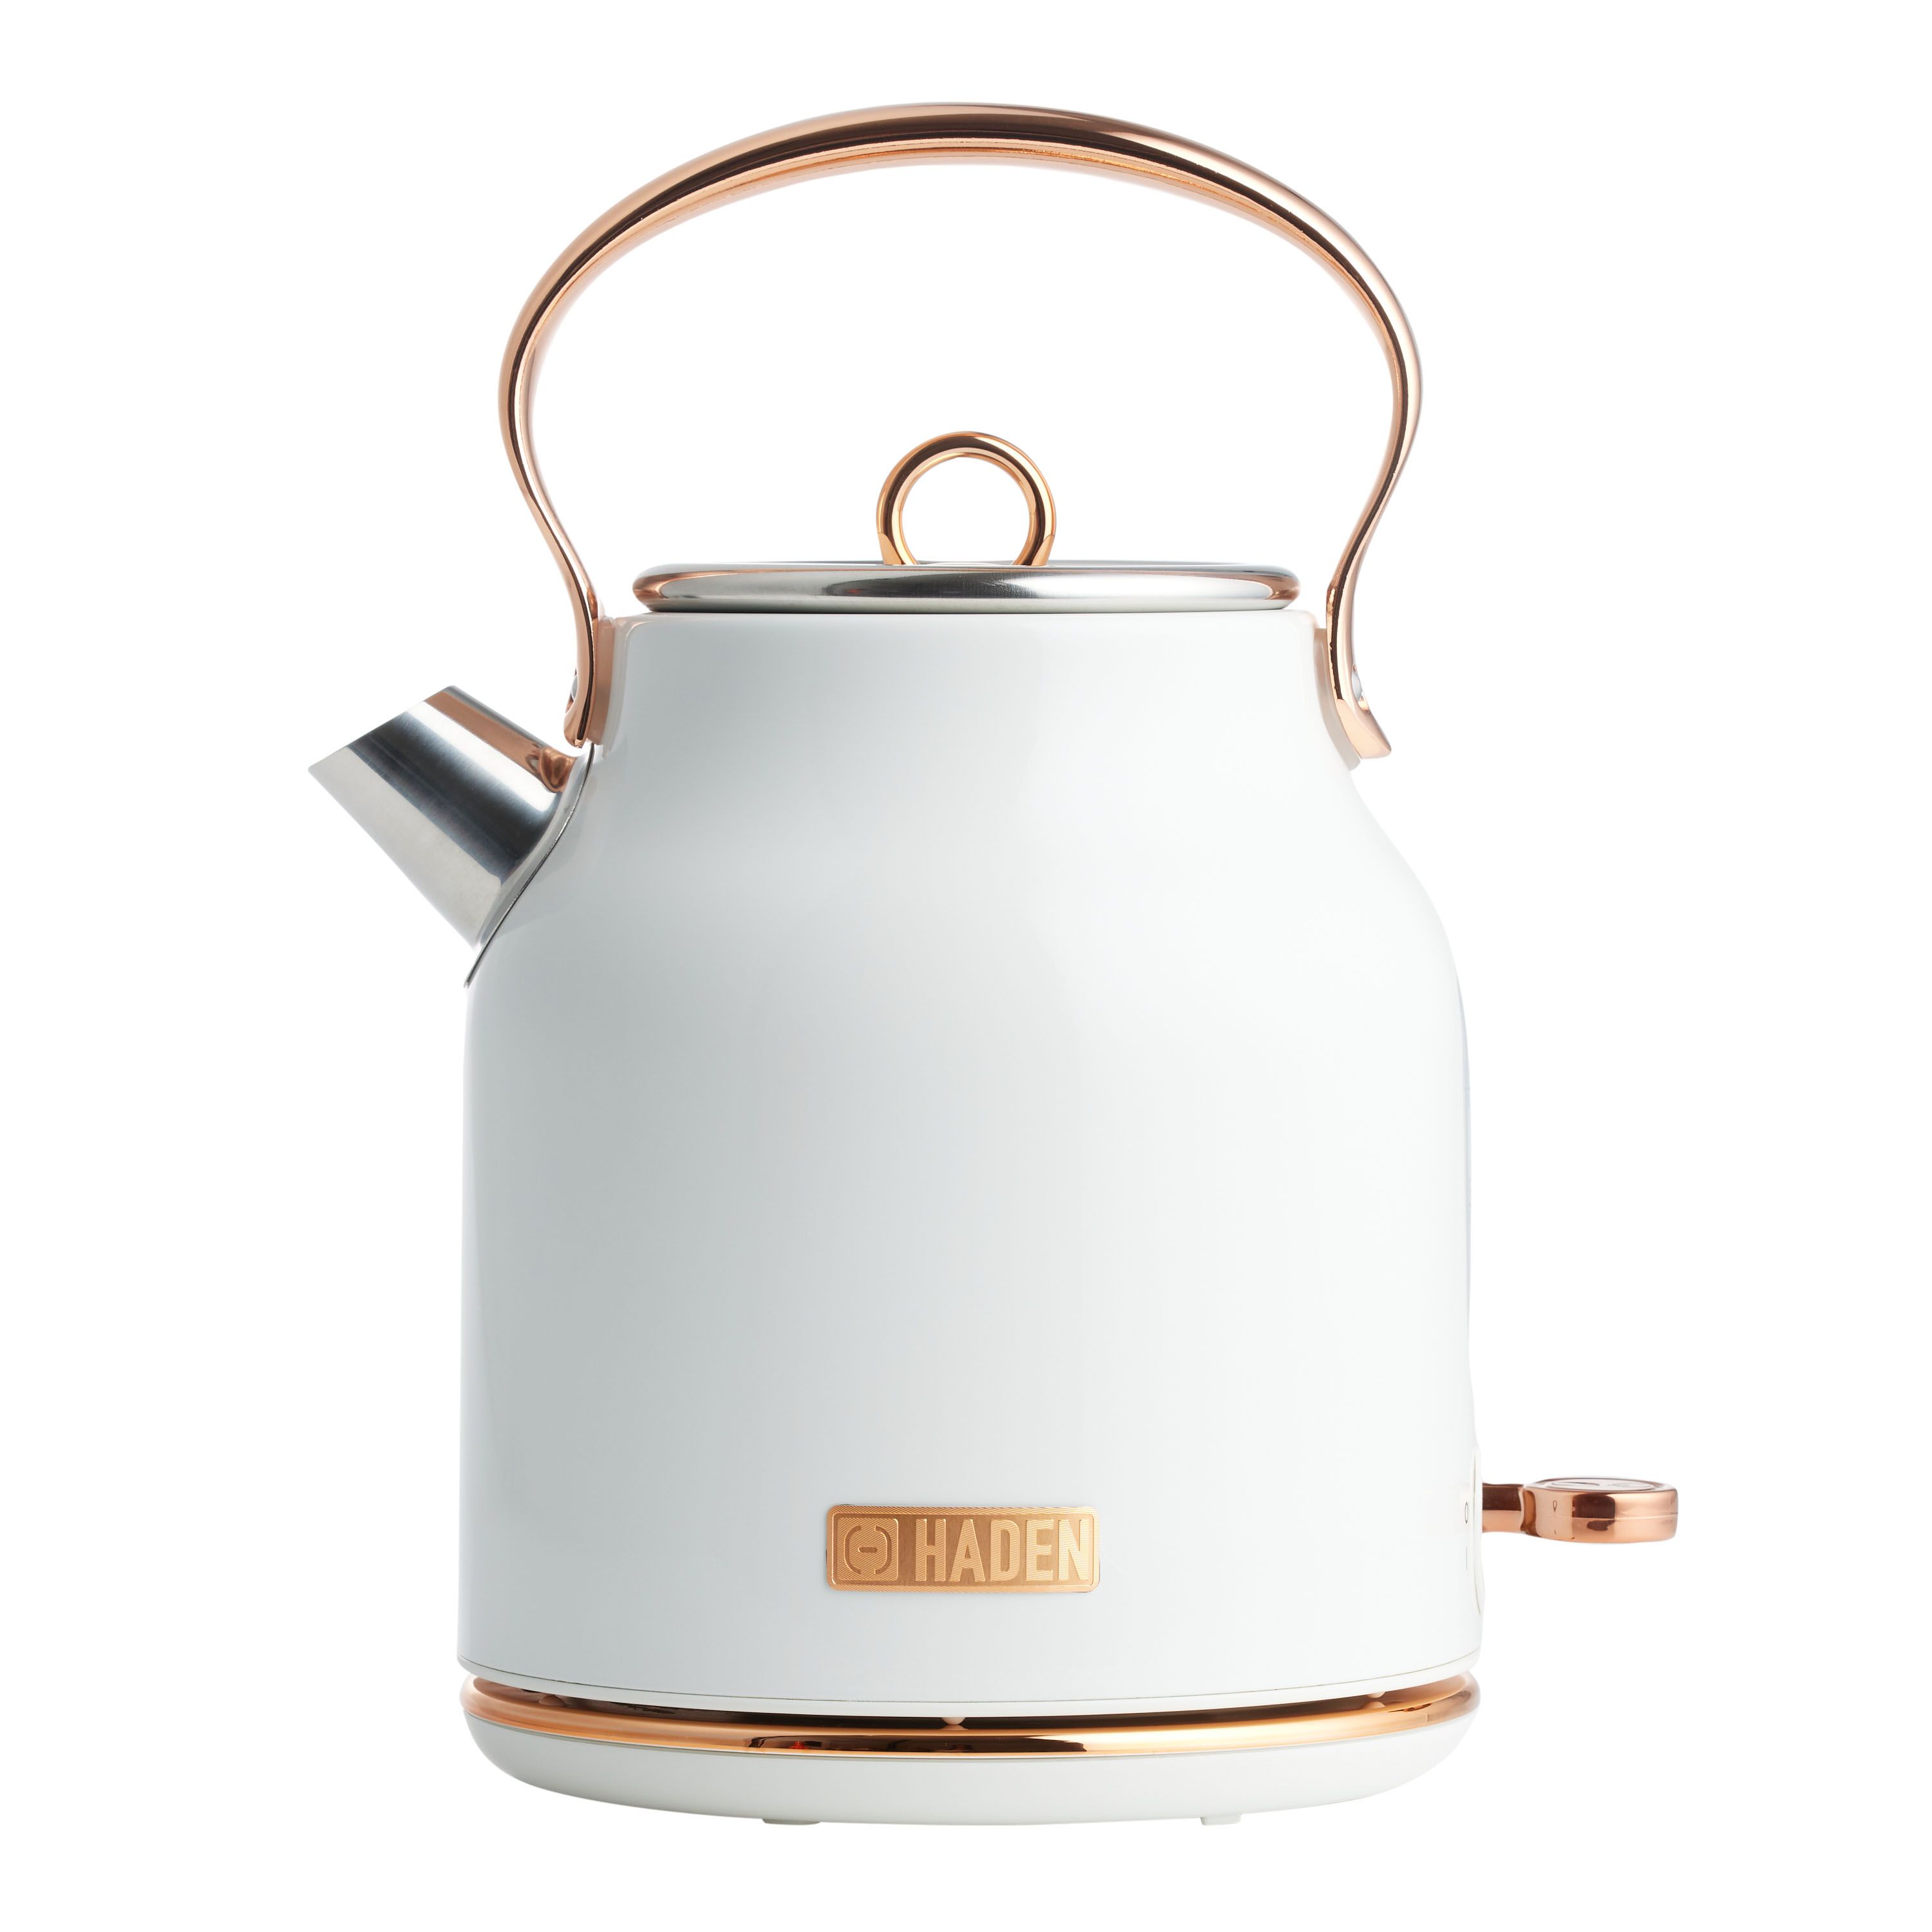 Haden Ivory and Copper Heritage Cordless Electric Kettle | World Market